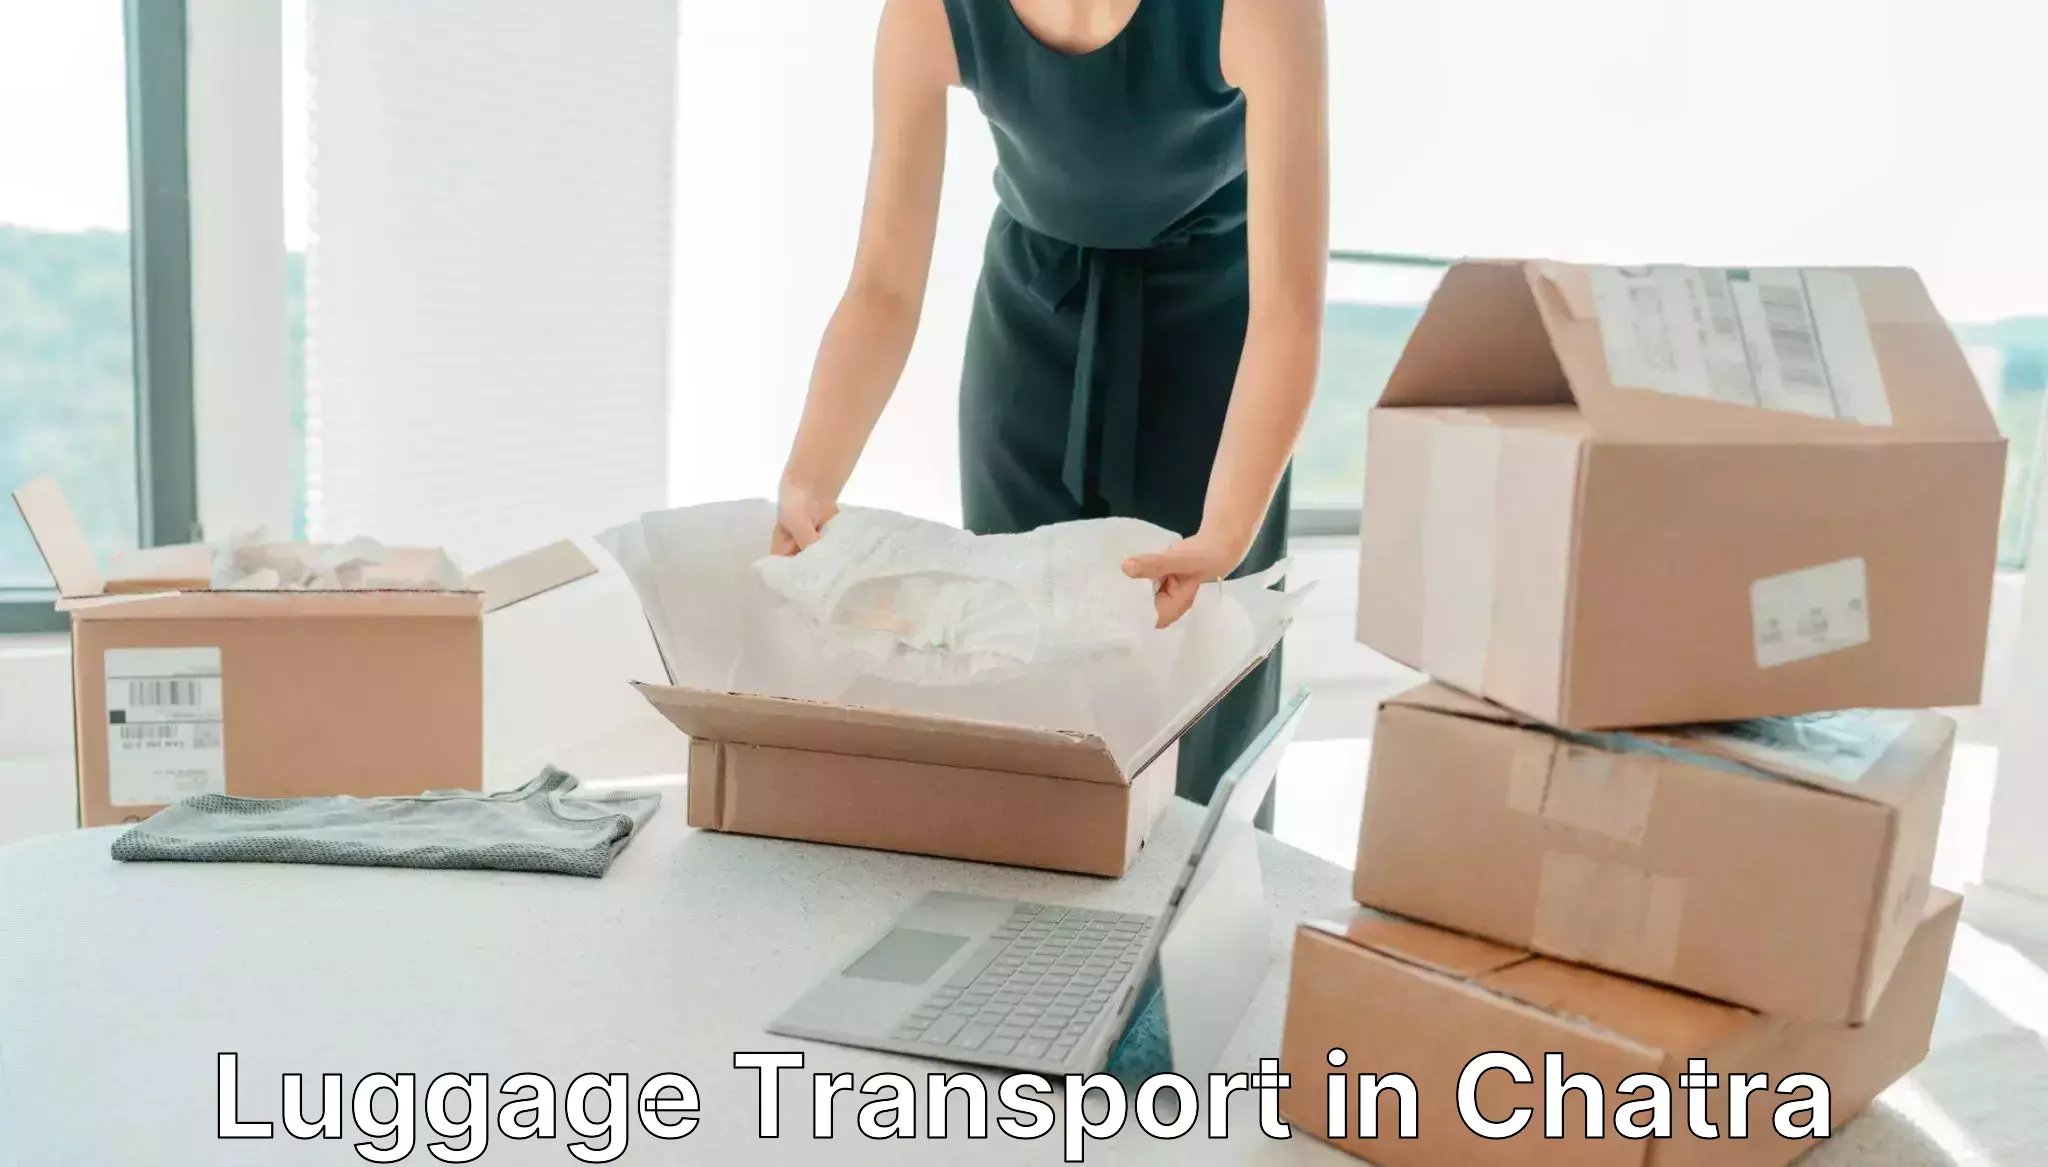 Luggage transfer service in Chatra